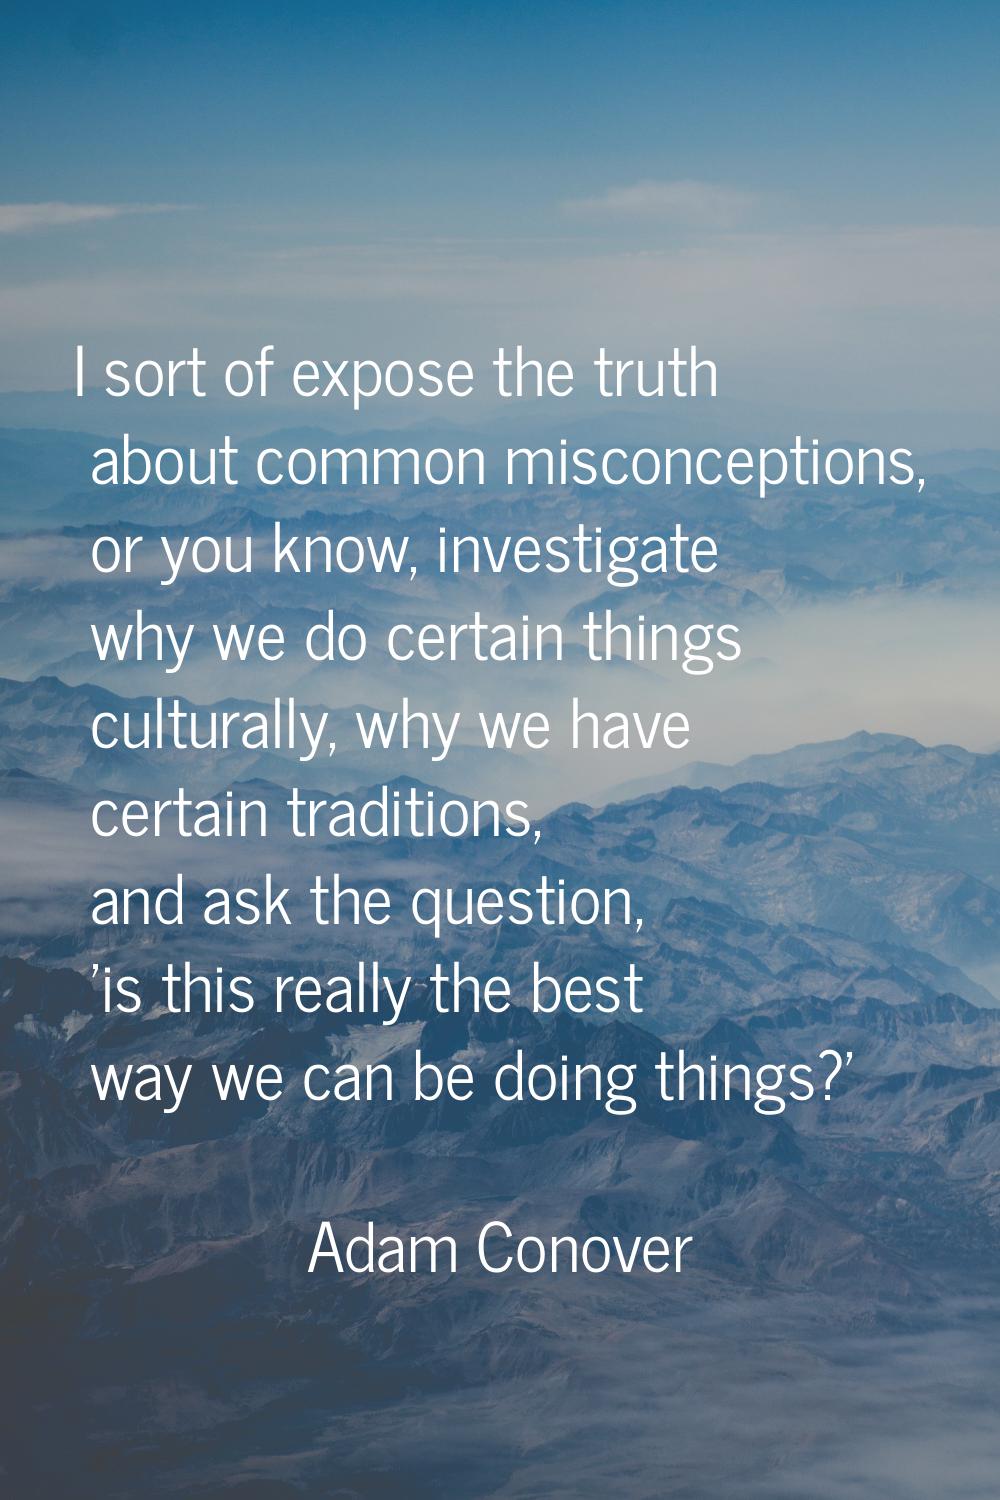 I sort of expose the truth about common misconceptions, or you know, investigate why we do certain 